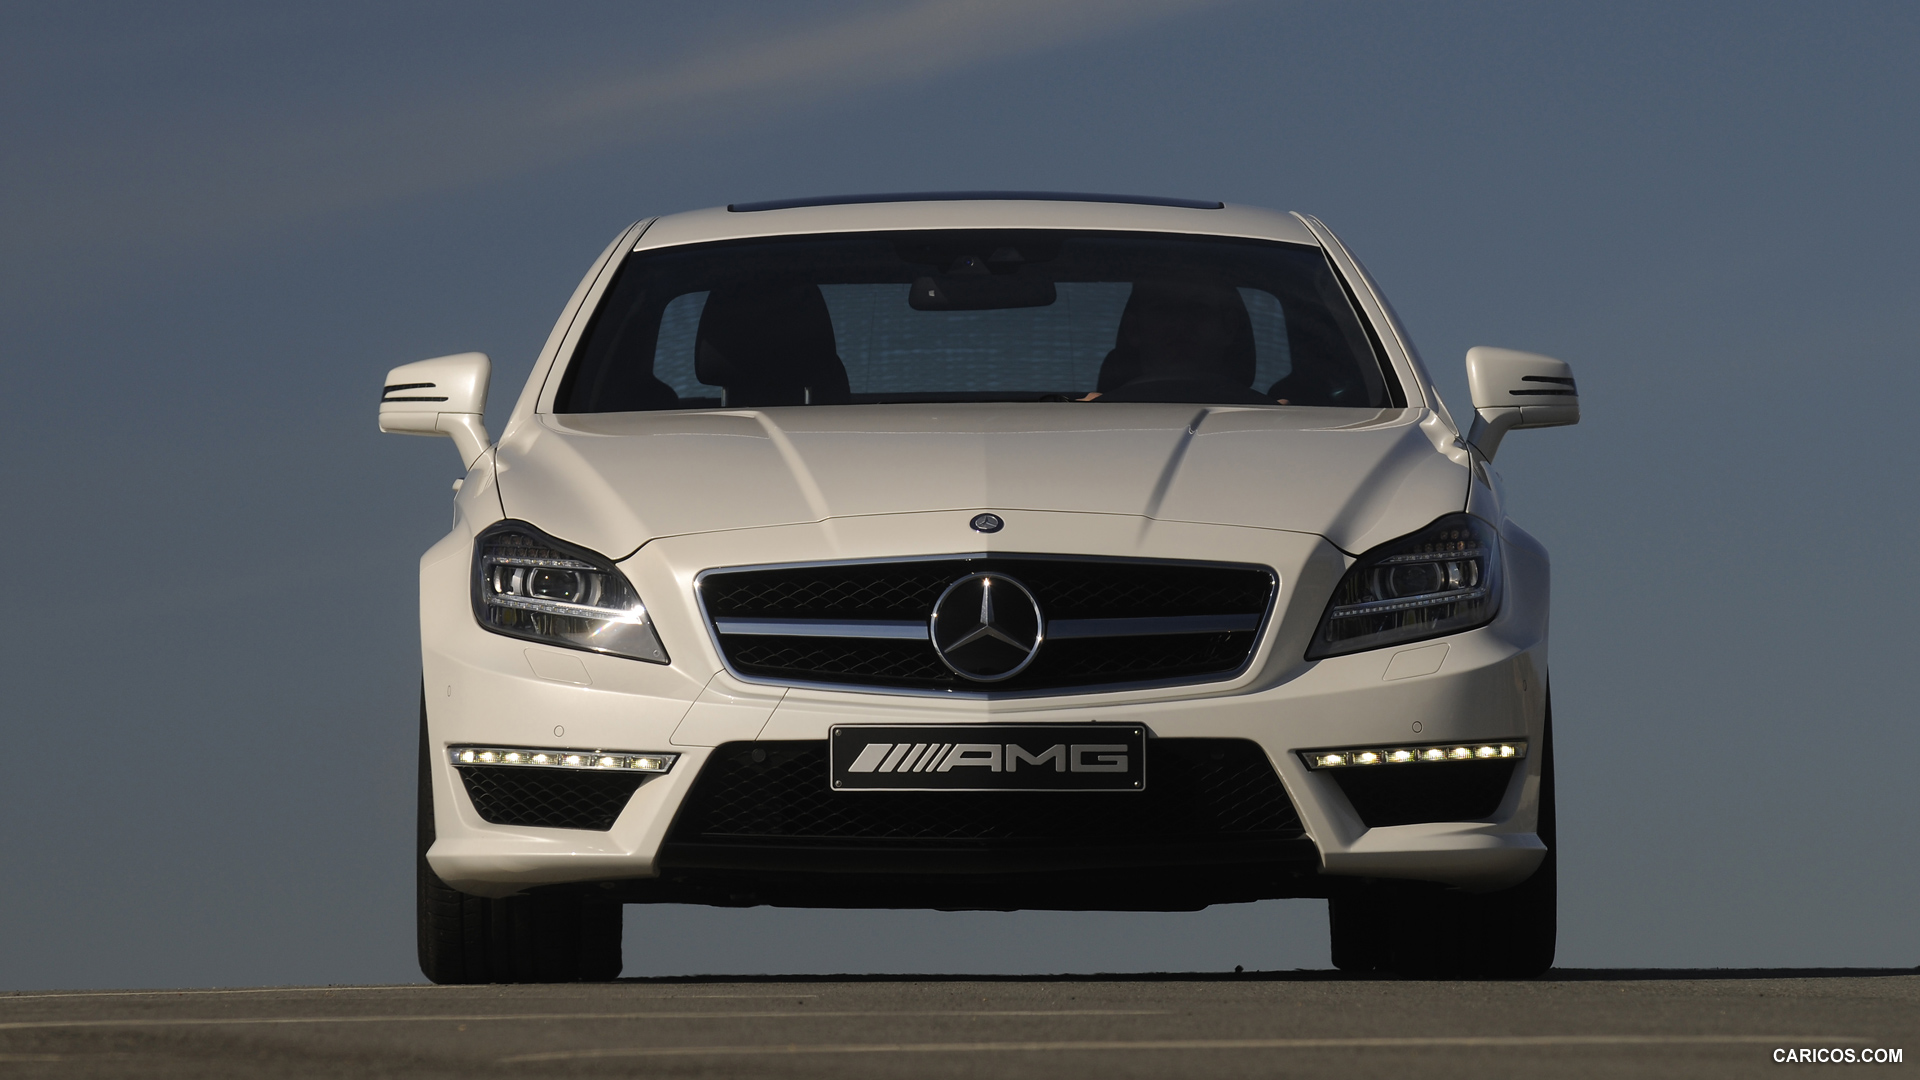 Mercedes-Benz CLS63 AMG (2012) US-Version - Diamond White - Front , #24 of 100